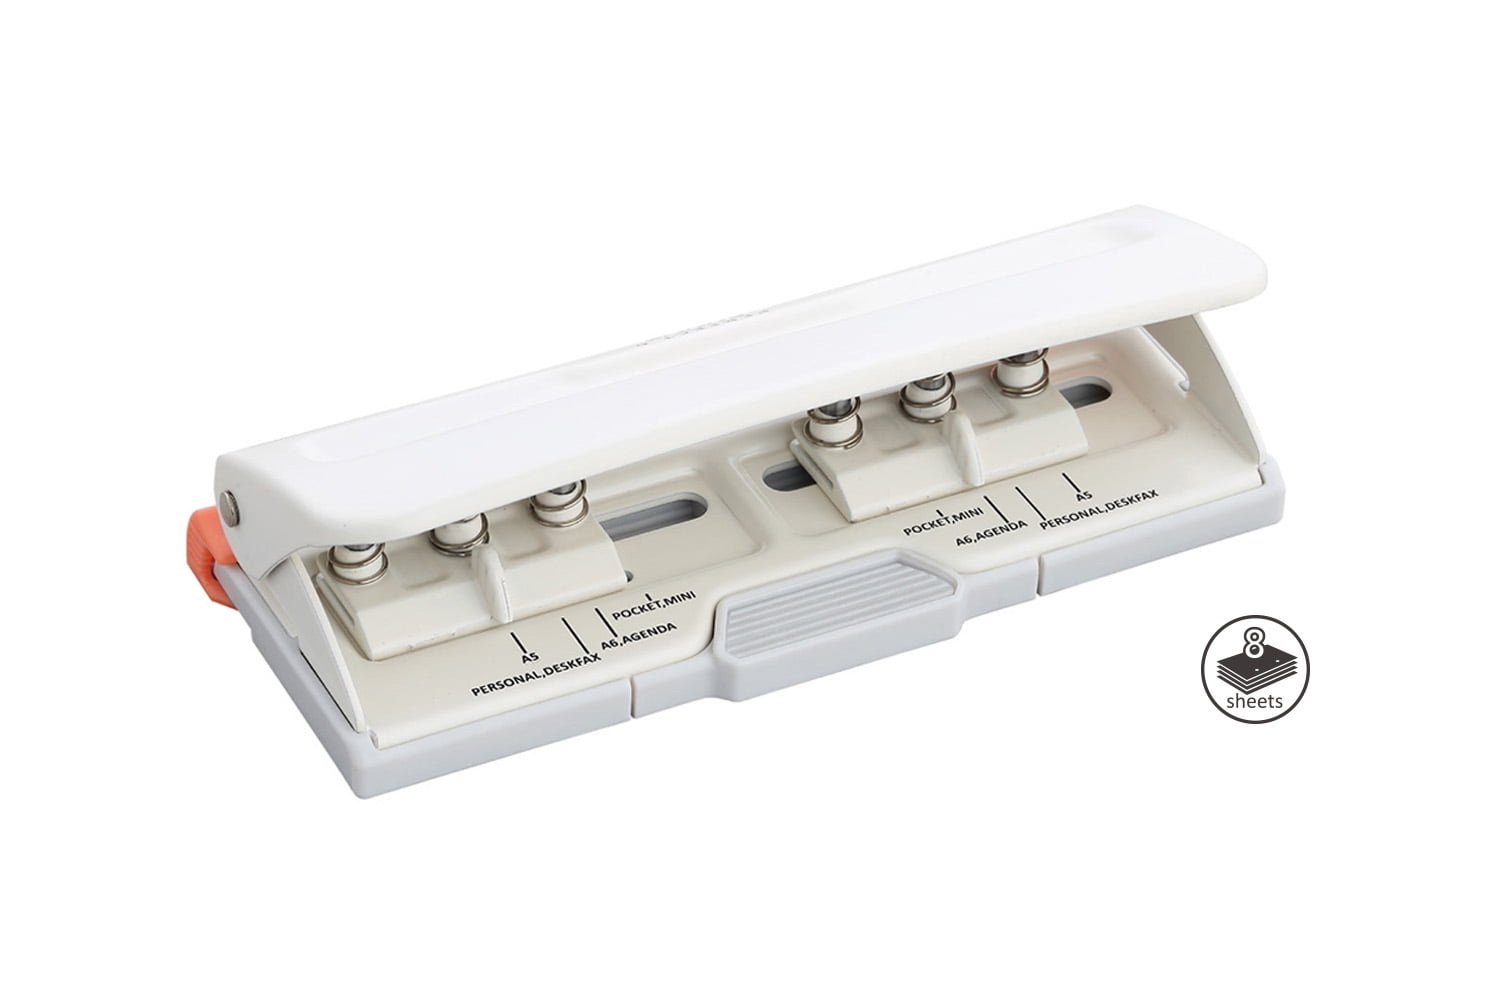 Officemate Adjustable 6-Hole Punch for Planners and Binders, 8 Sheet…